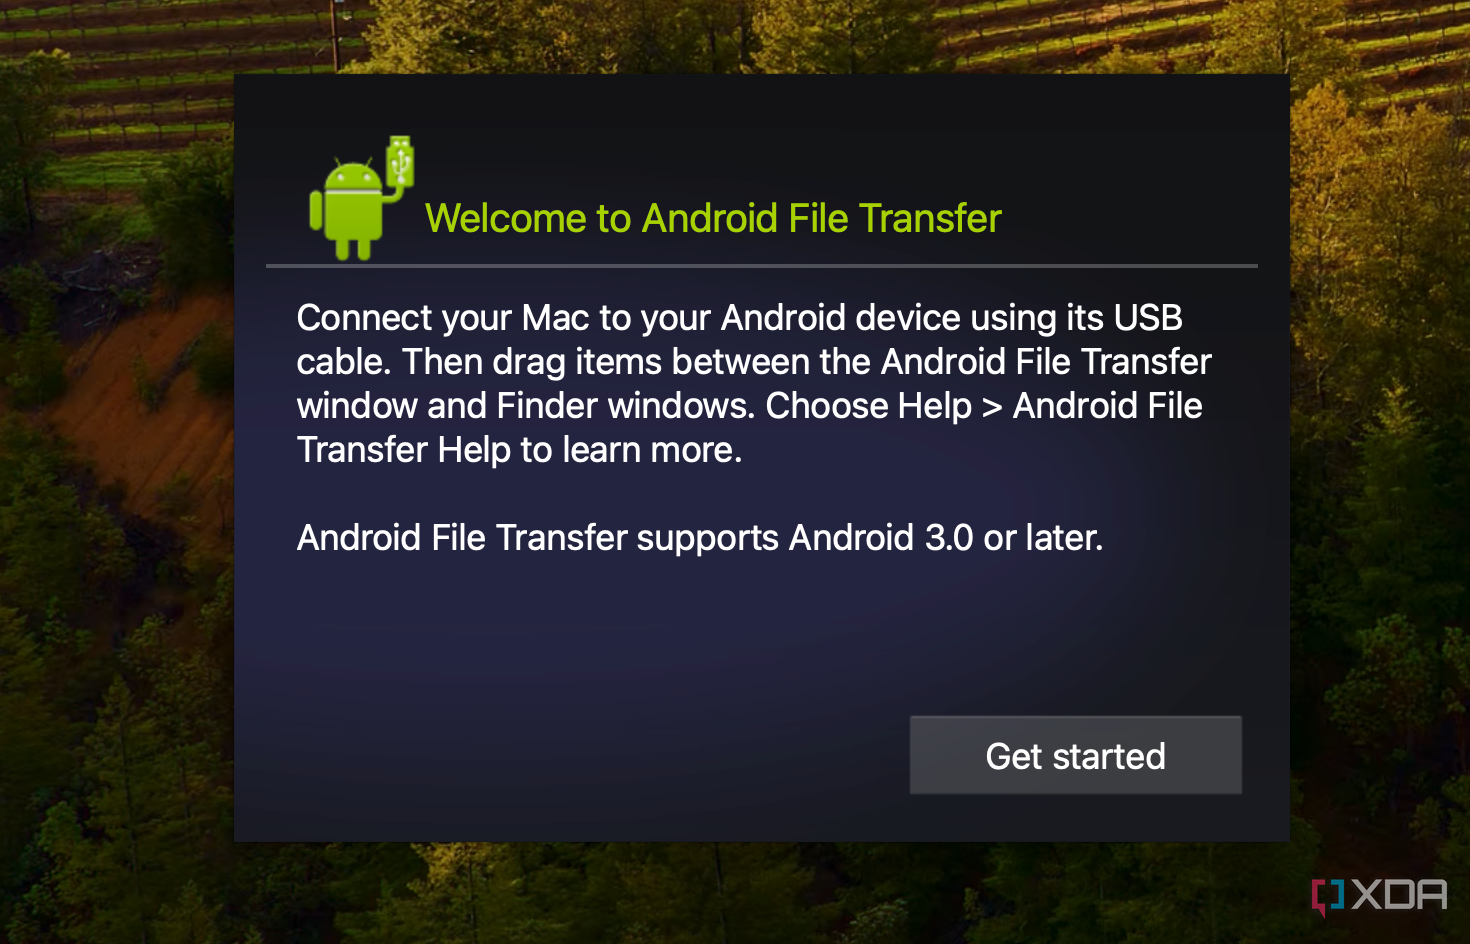 The get started with Android File Transfer message on macOS